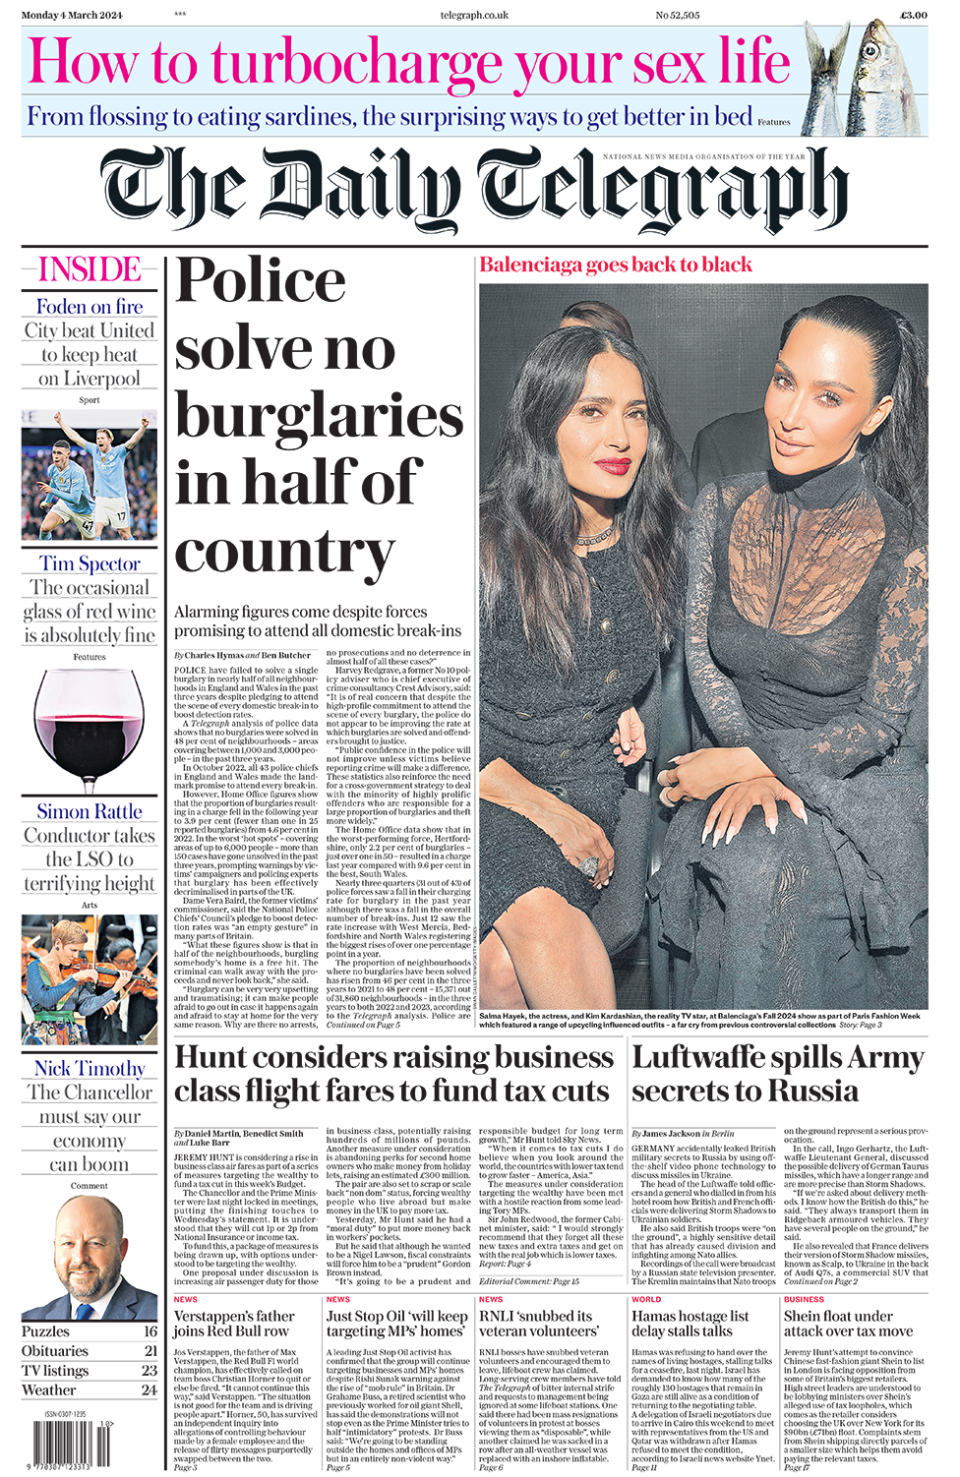 The headline in the Telegraph reads: "Police solve no burglaries in half of country".